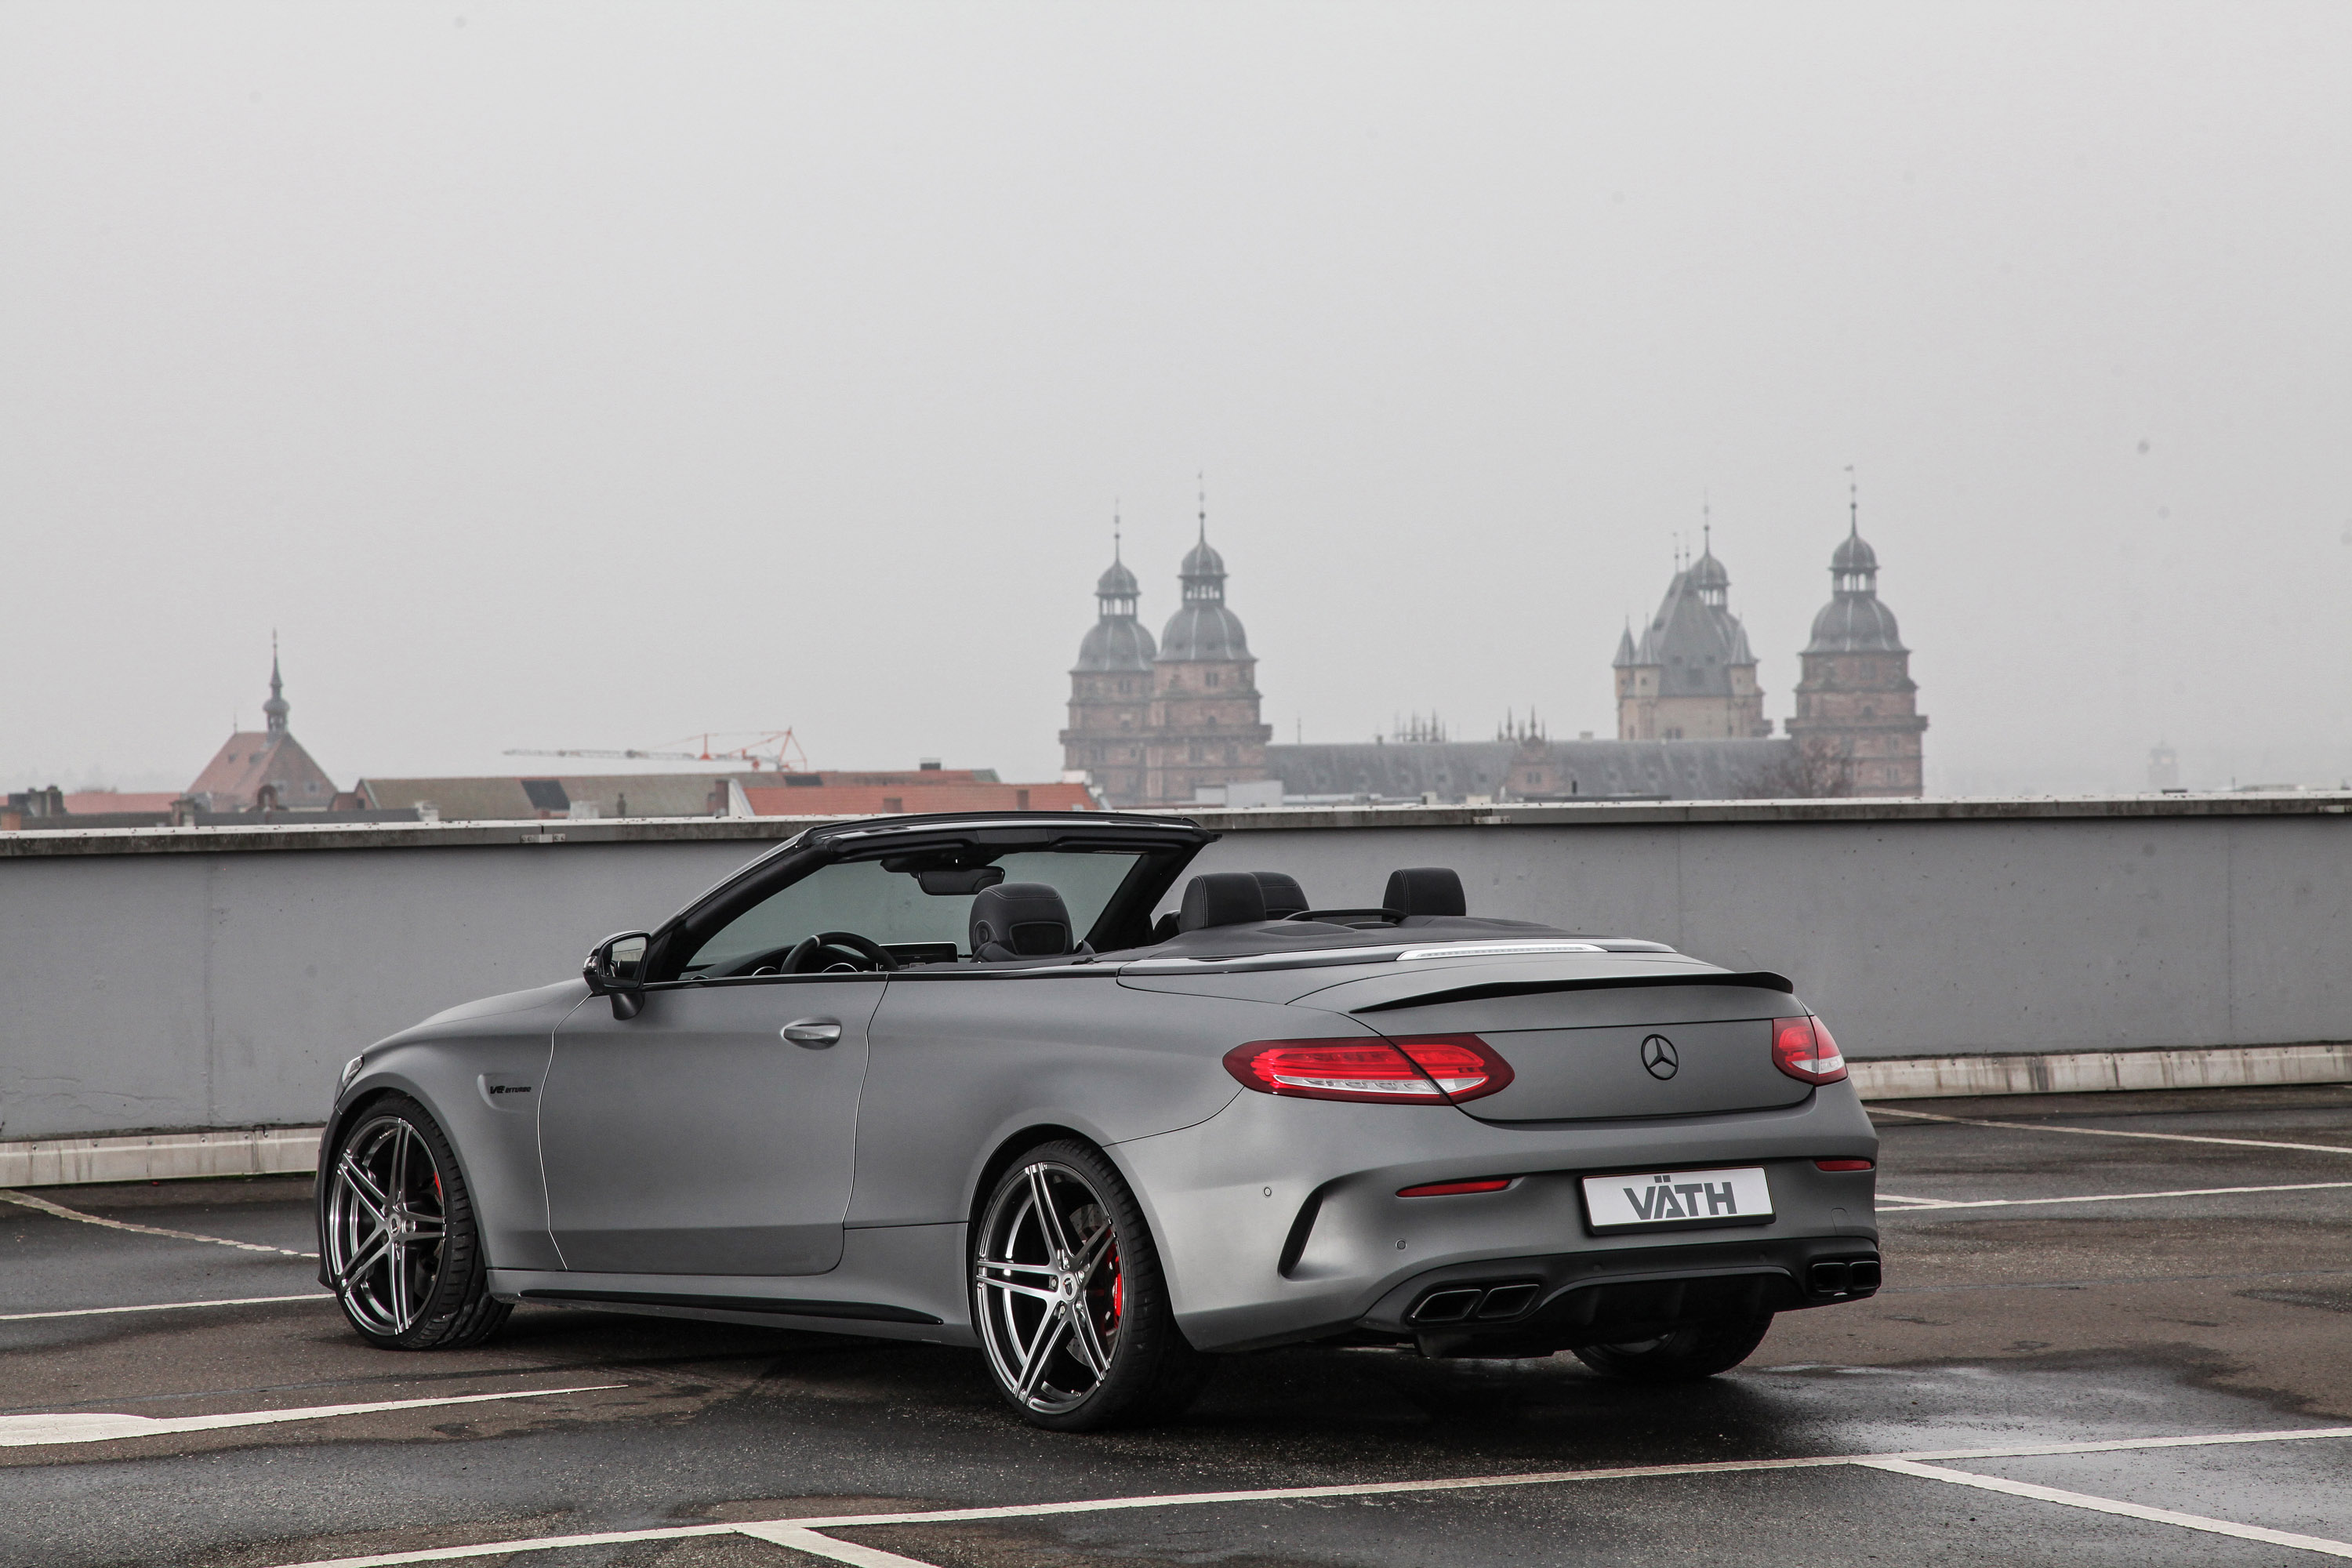 VATH Mercedes-AMG C-Class Coupe and Cabriolet